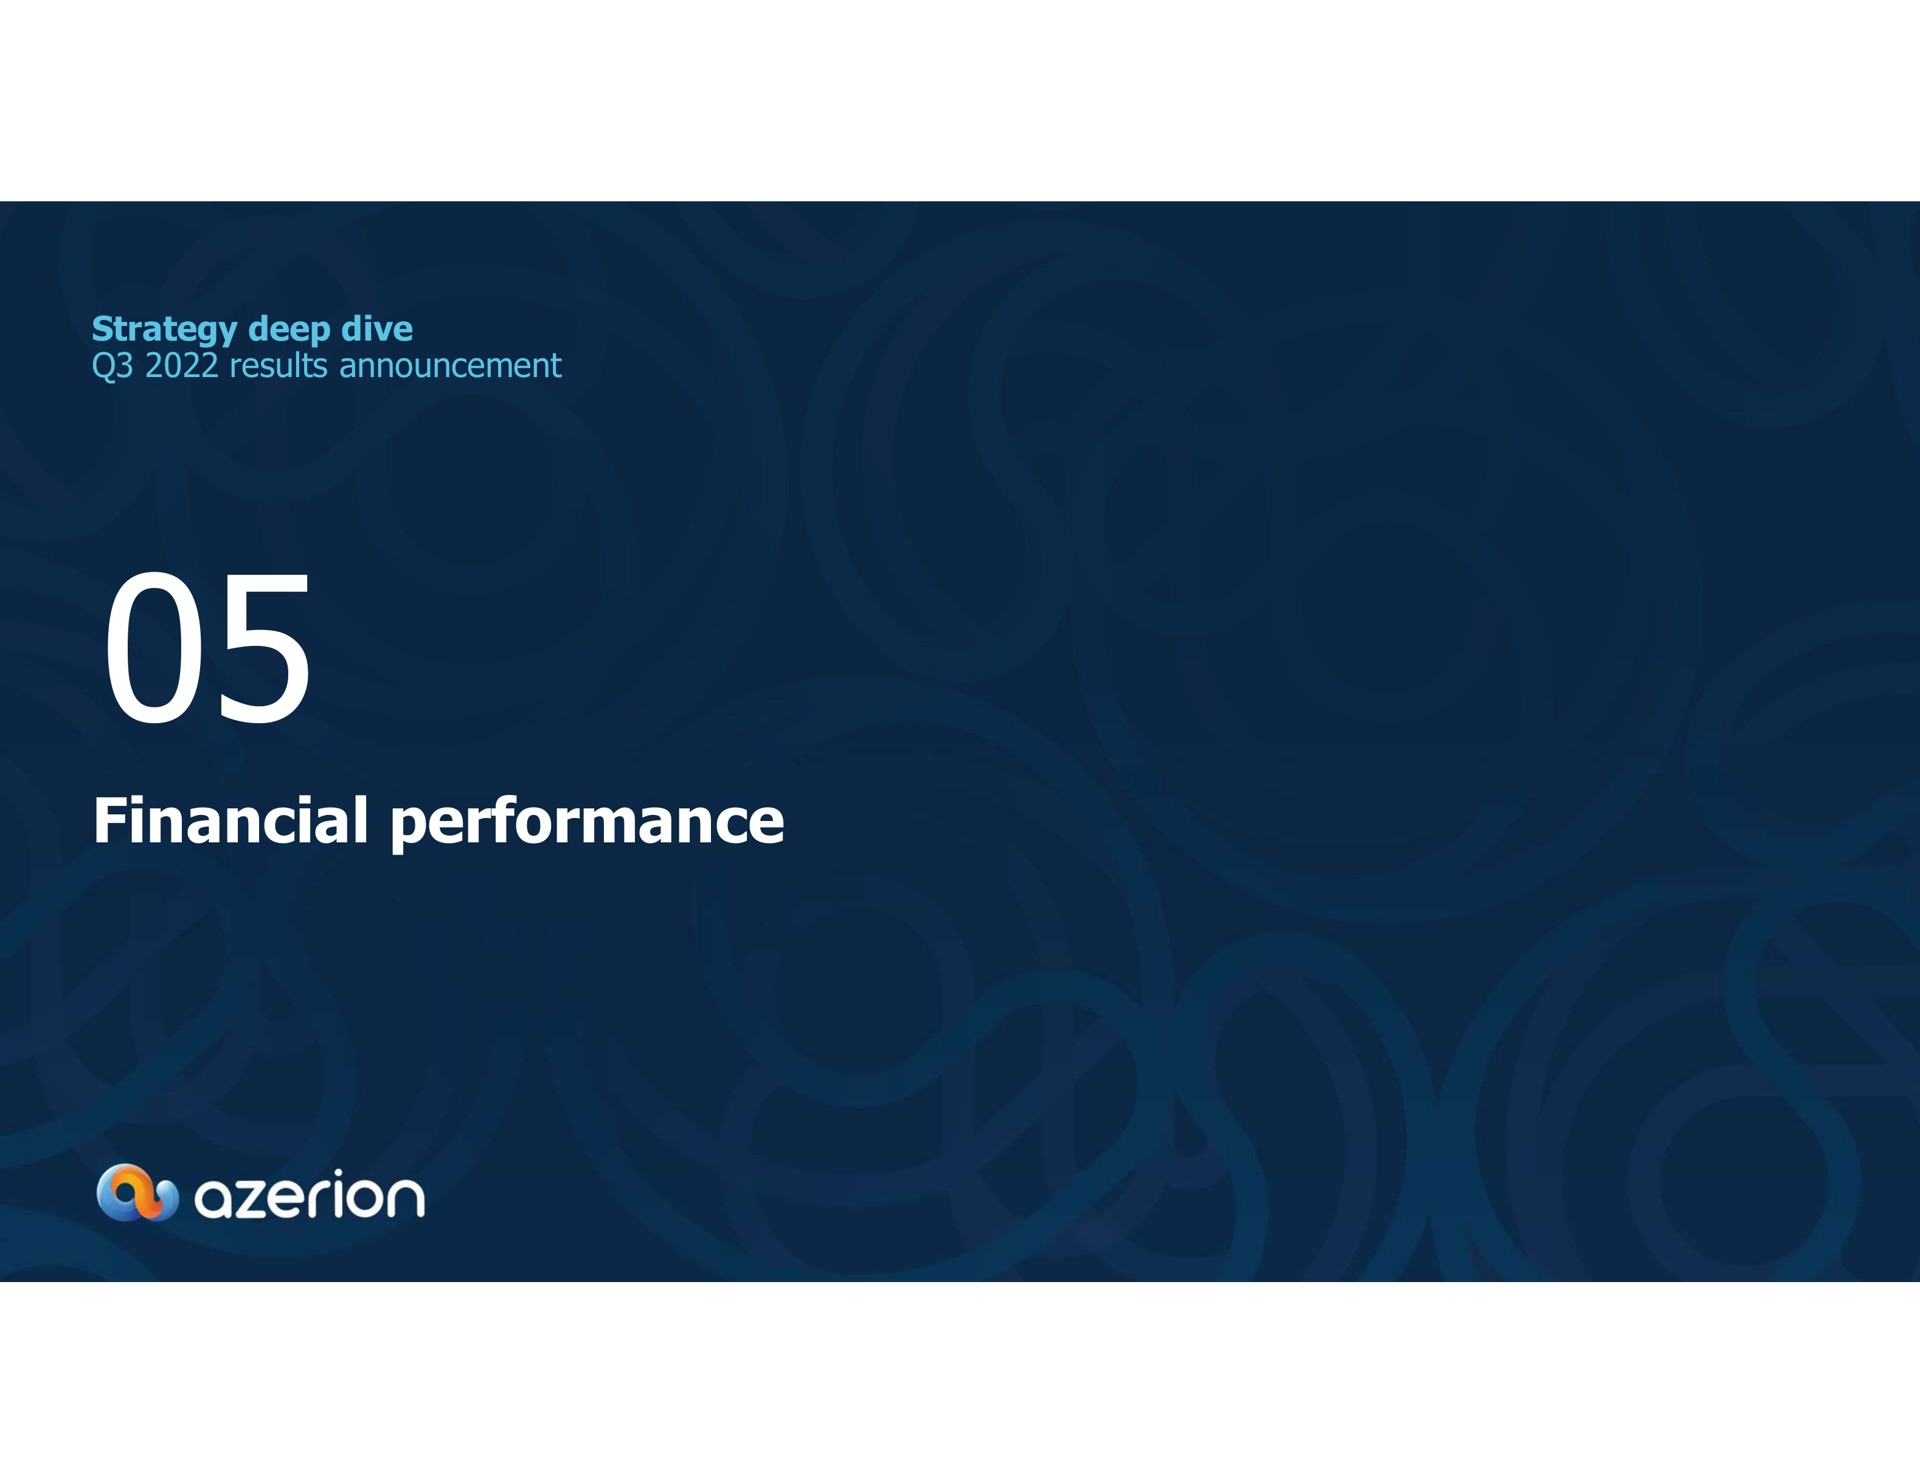 strategy deep dive results announcement financial performance as | Azerion